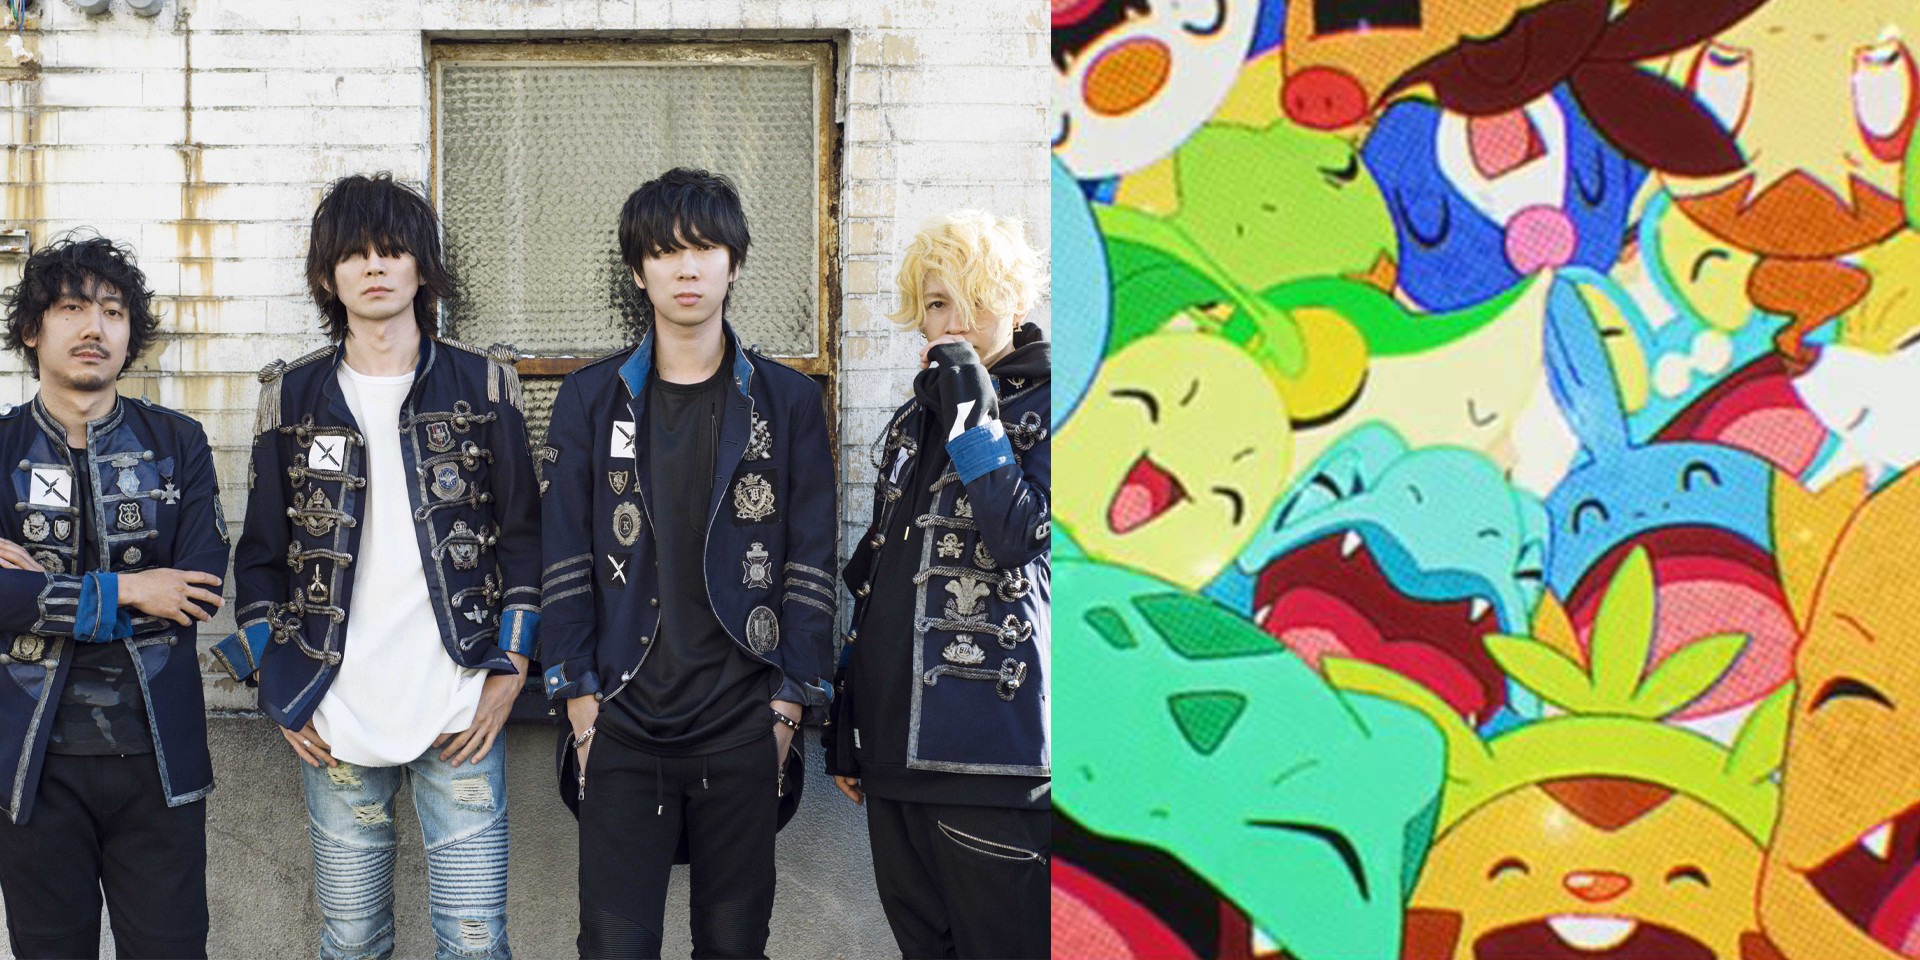 Bump Of Chicken Pay Tribute To The Legacy Of Pokemon With Acacia